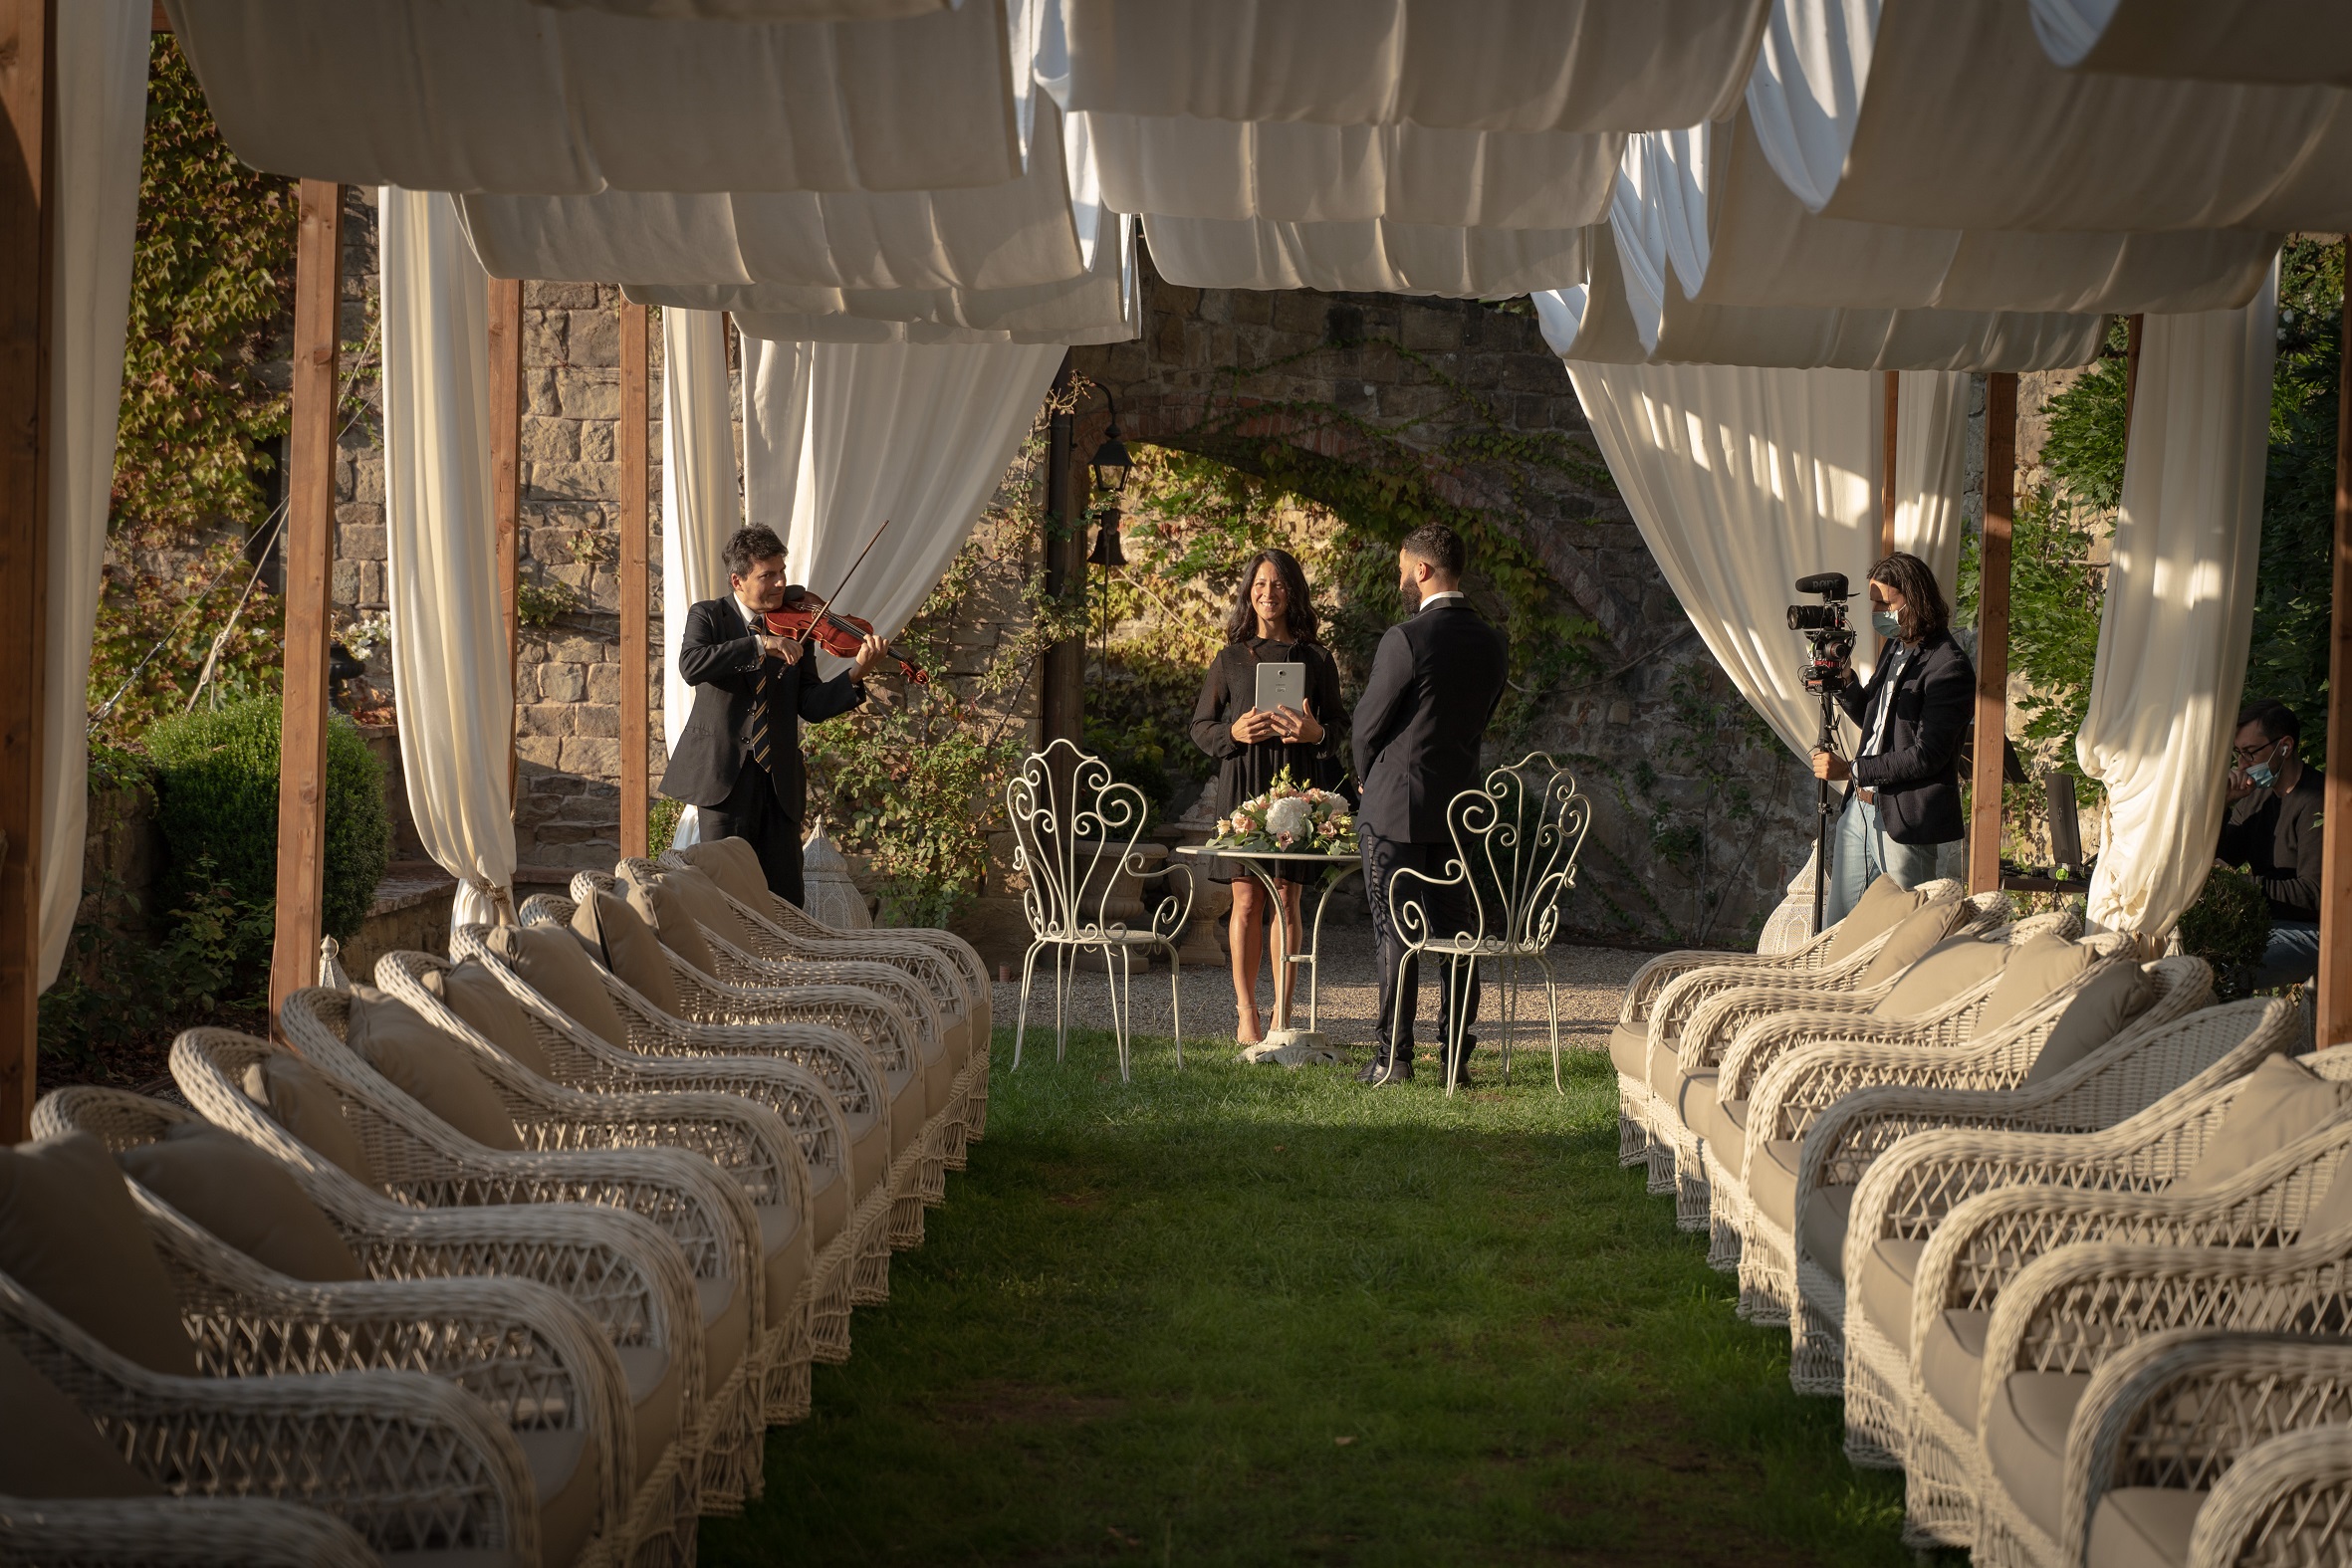 Wedding planner and celebrant in Tuscany